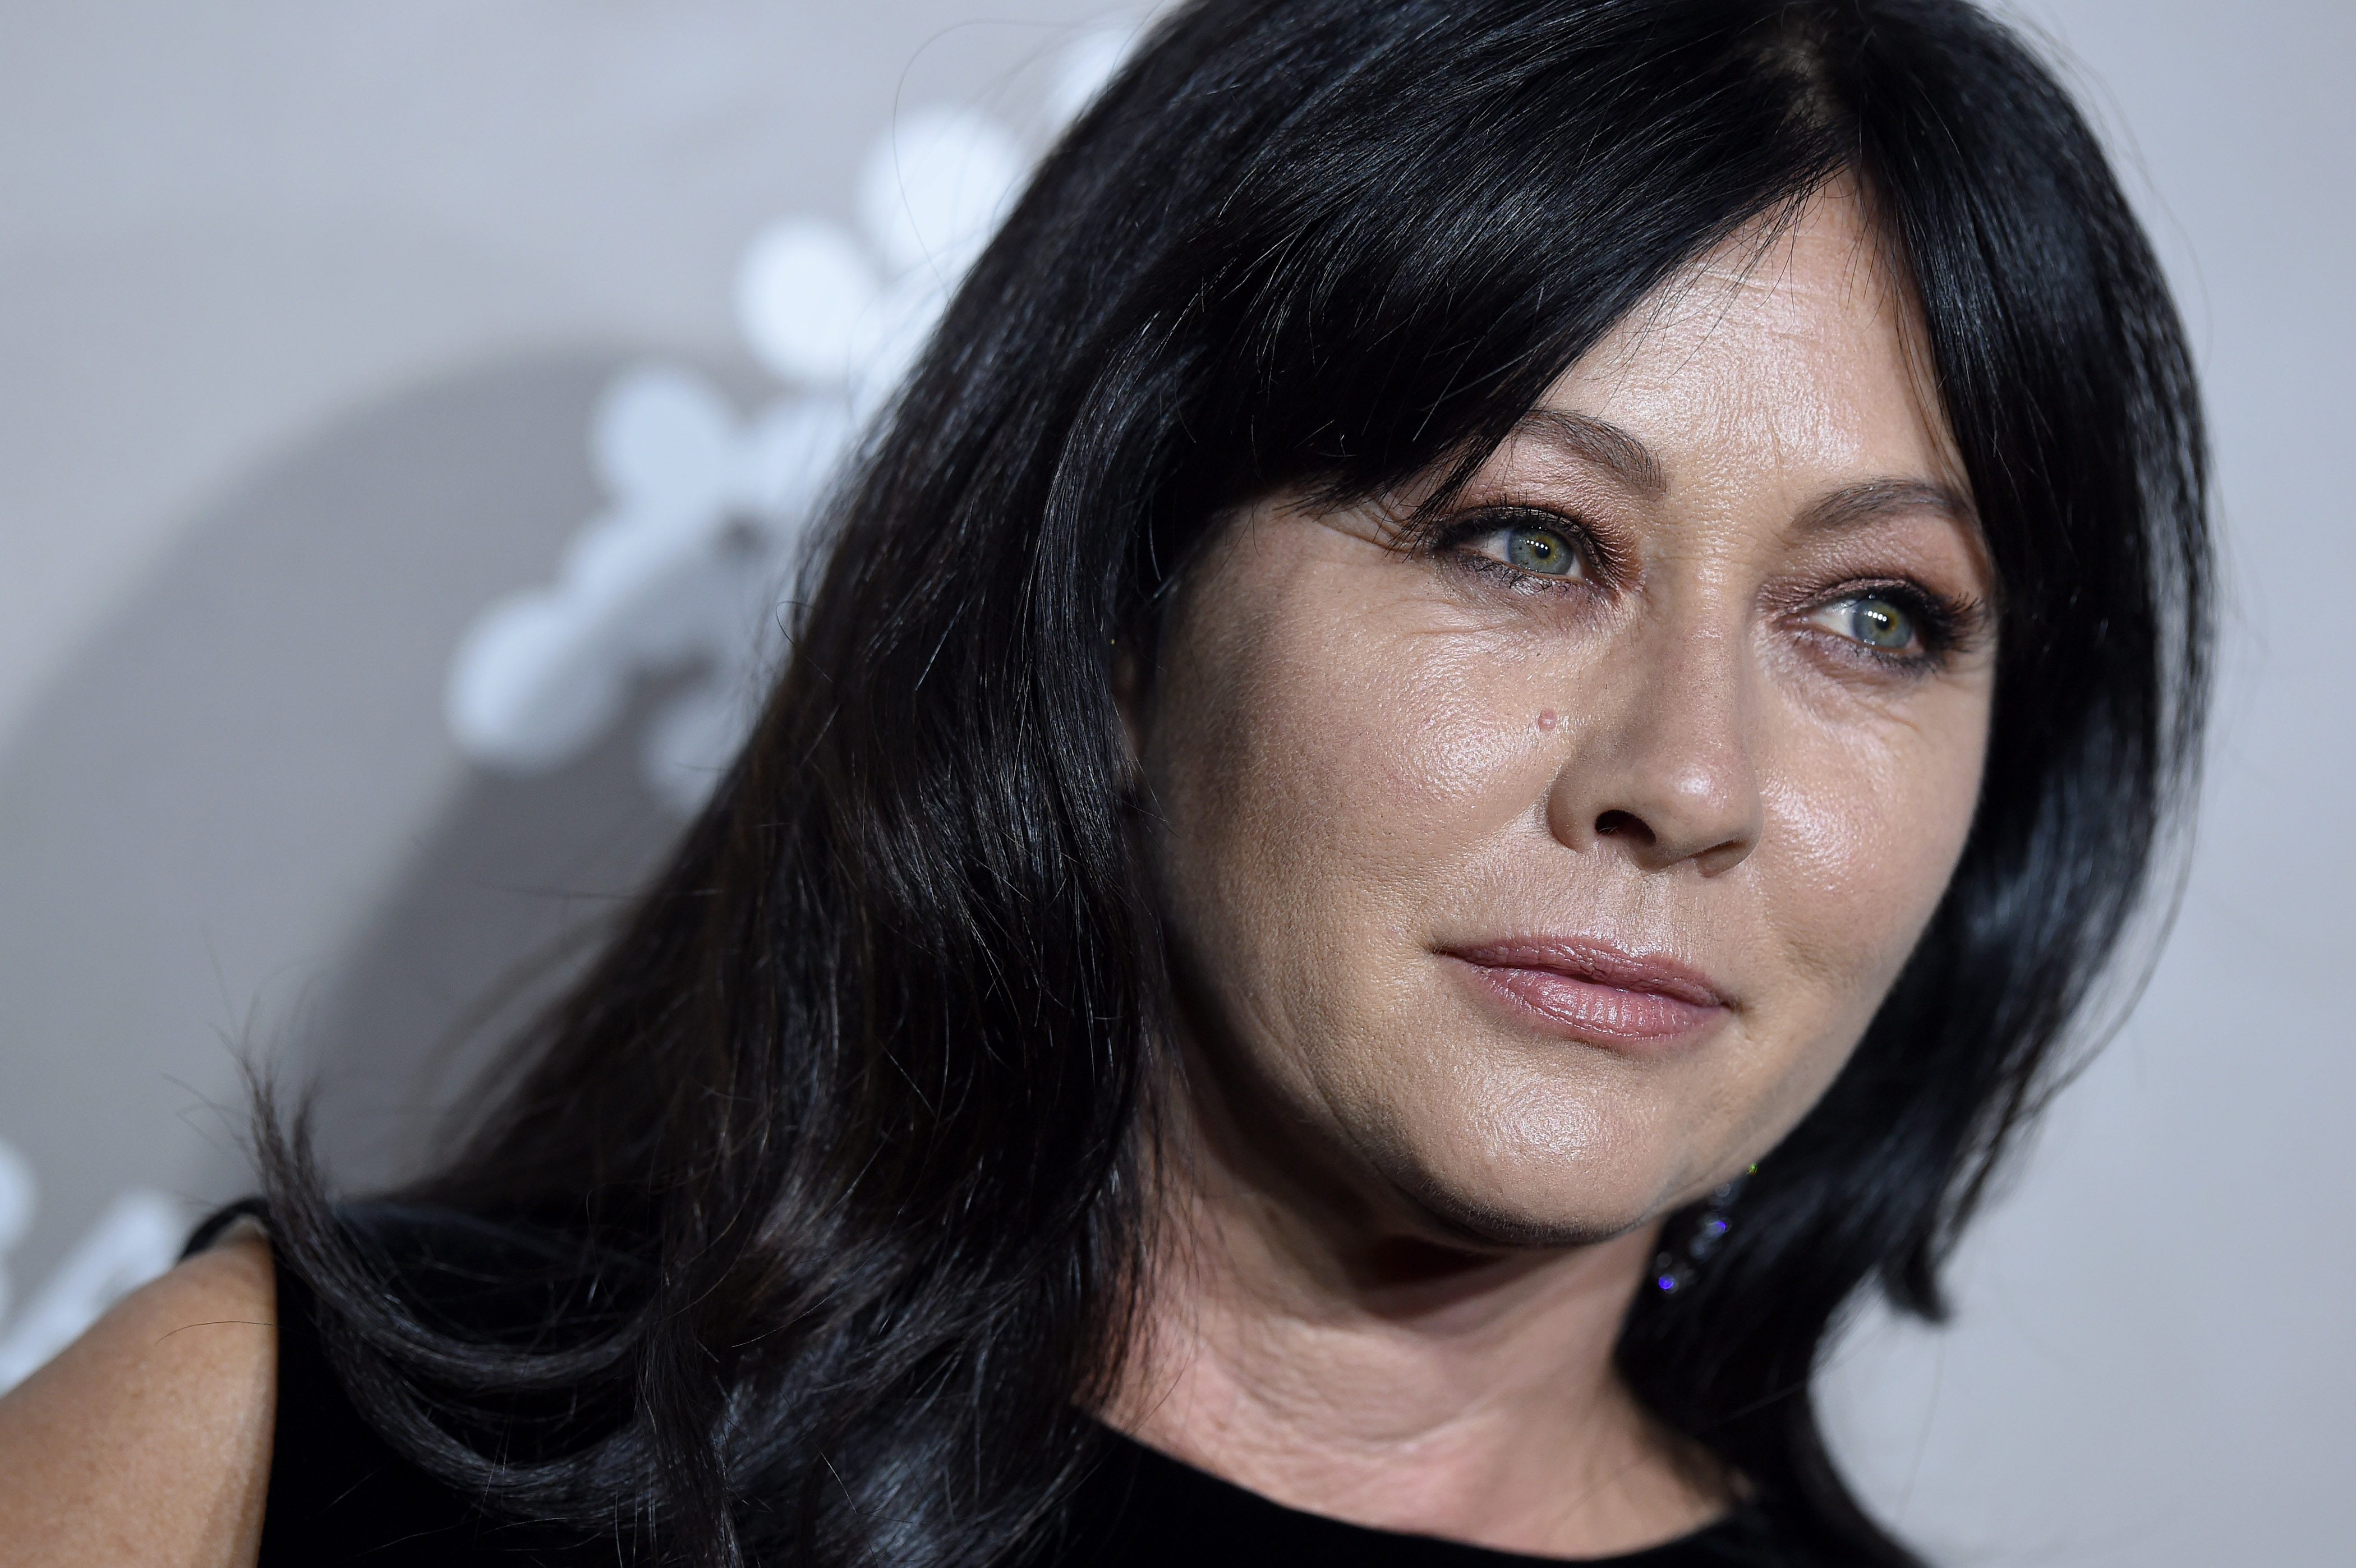 Shannen Doherty on November 14, 2015 in Culver City, California. | Source: Getty Images